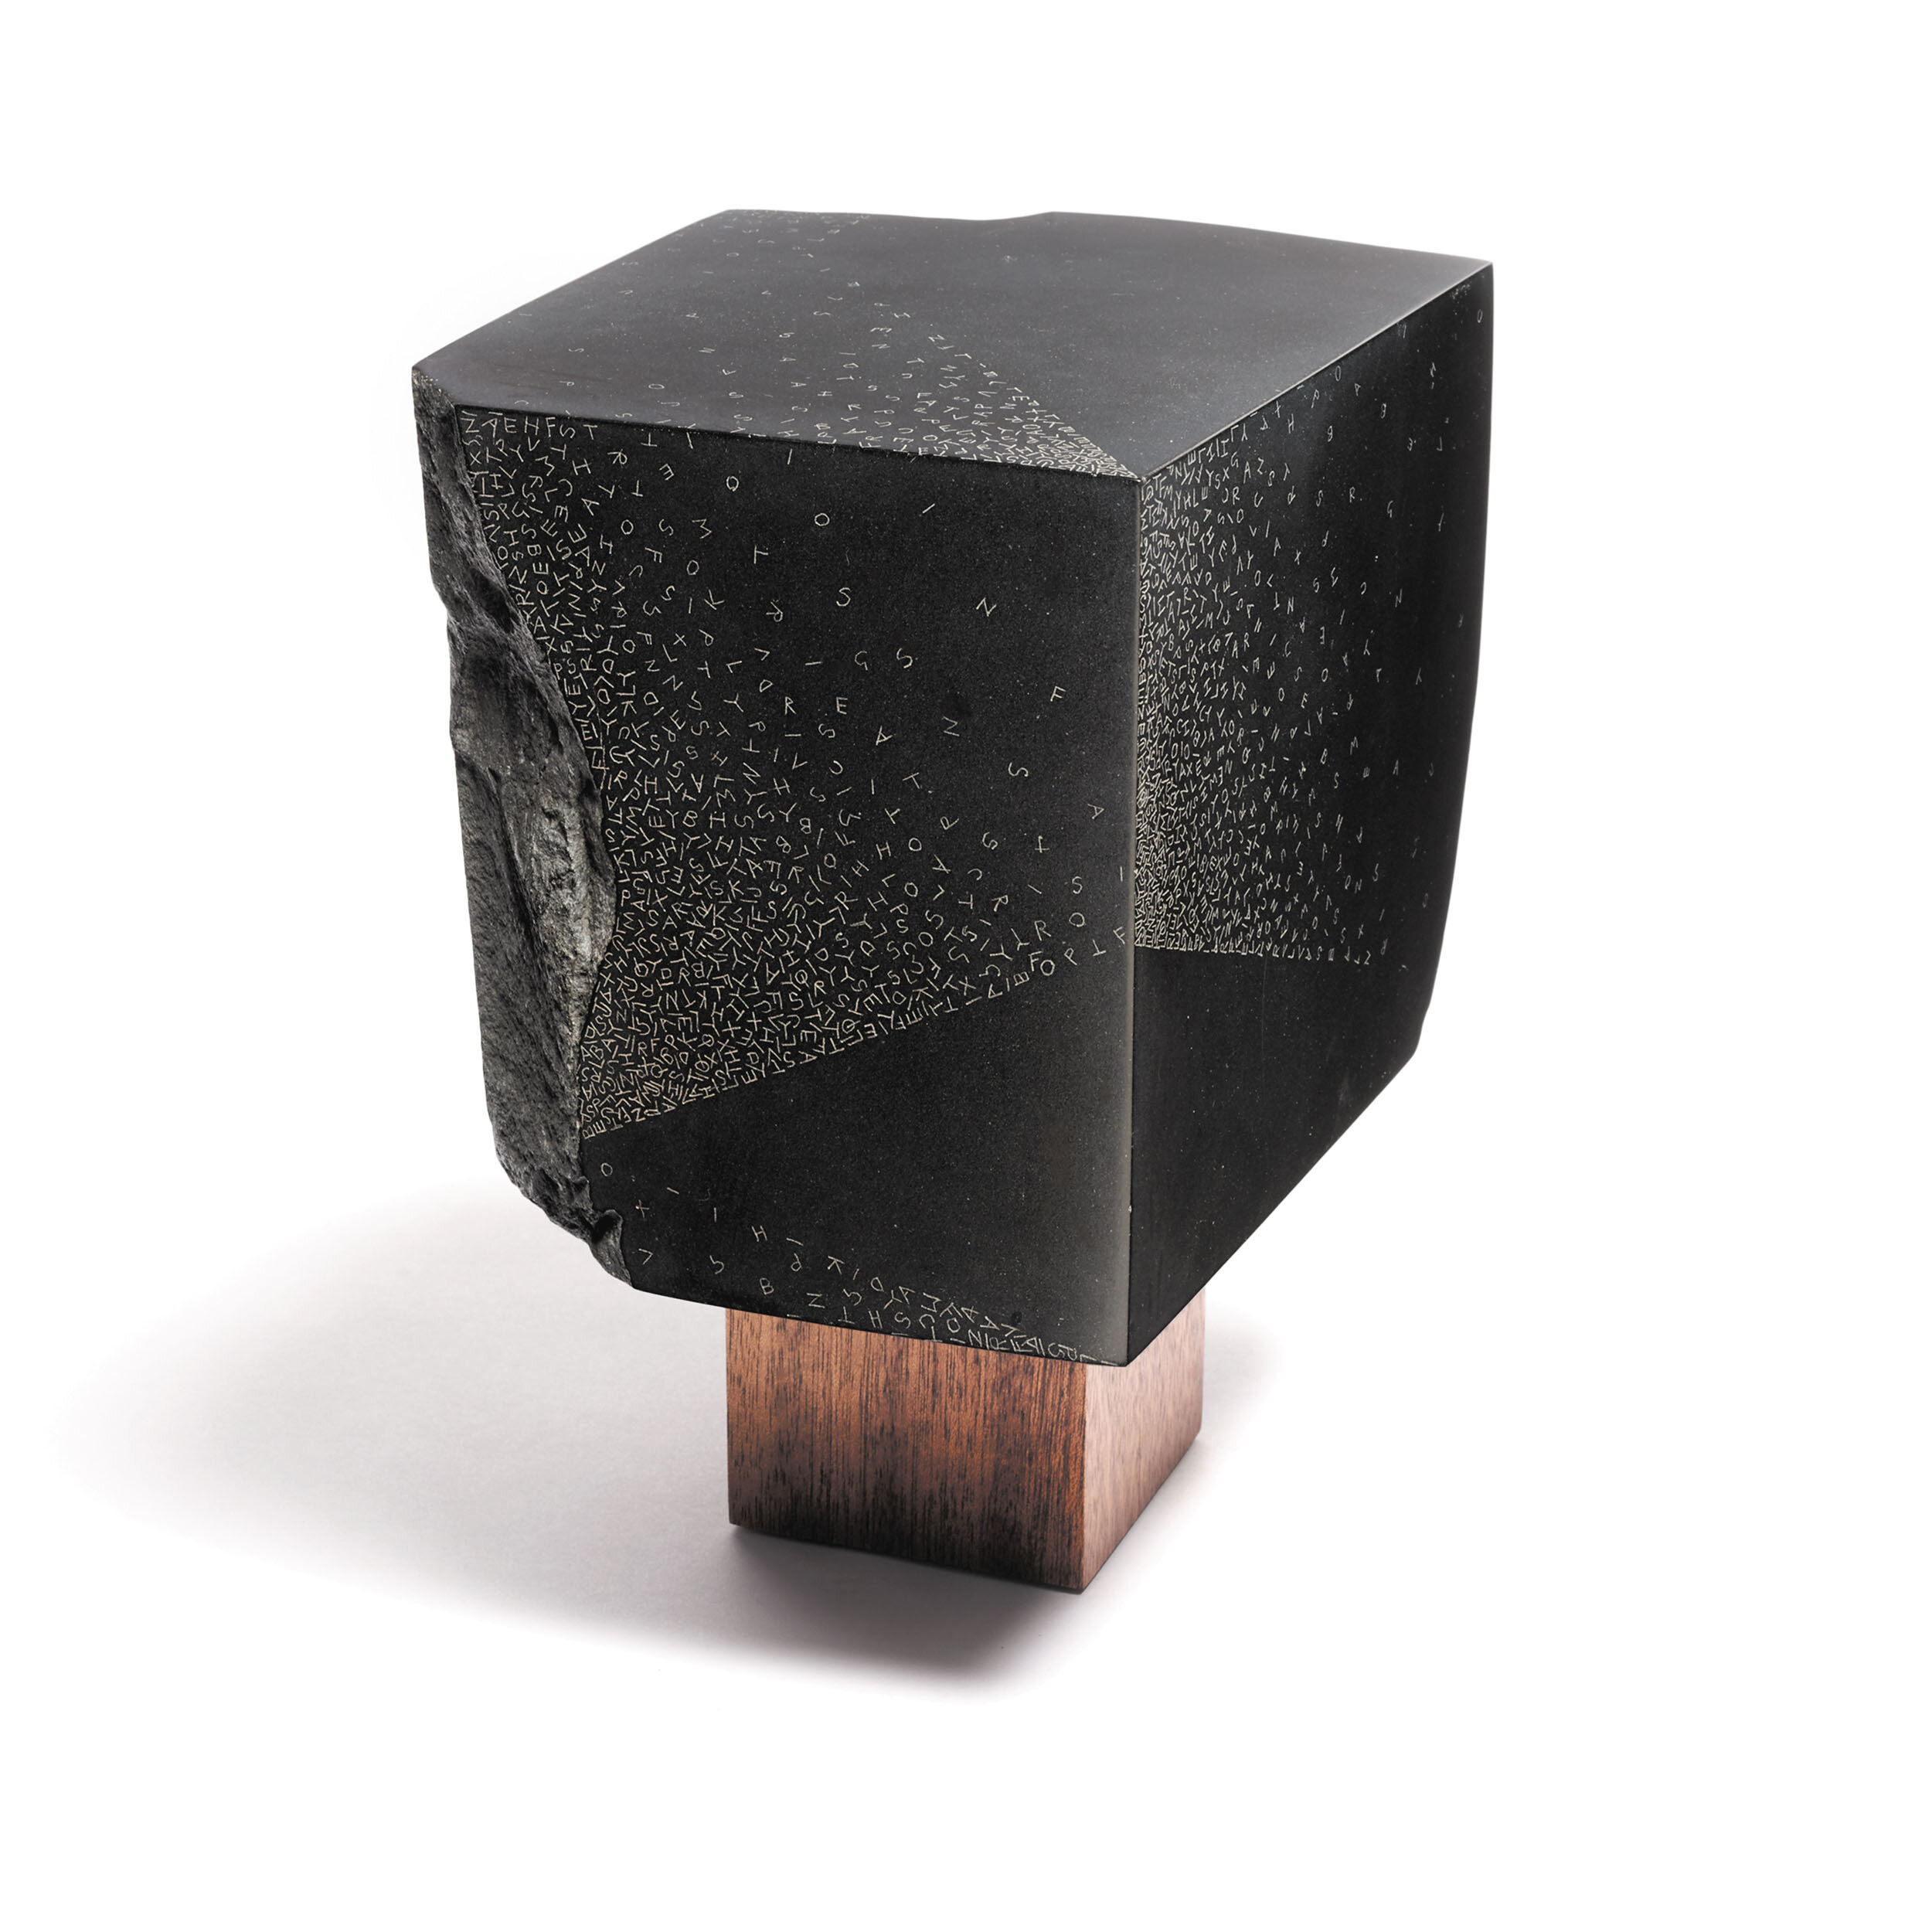   Untitled  (Head)  2013 African pyrophyllite and wood  10” x 6¾” x 7½” 